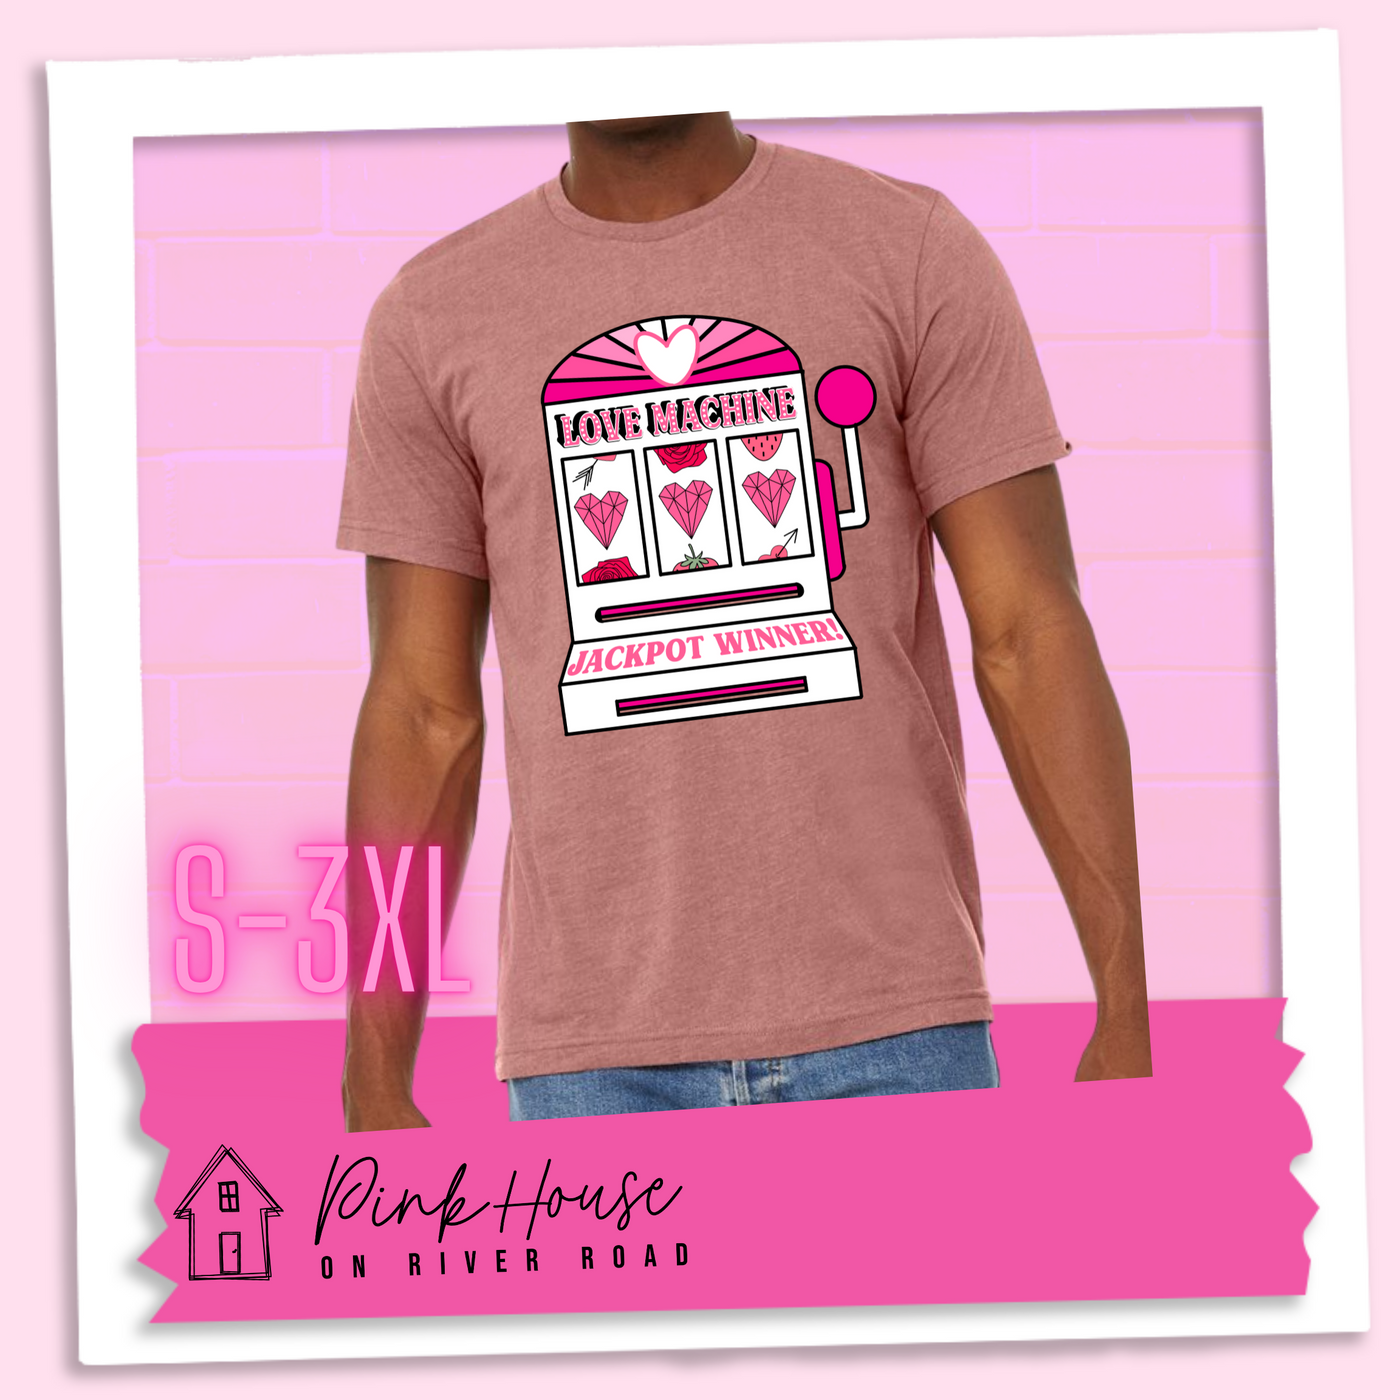 Heather Mauve Tee with a graphic. Graphic is of a white slot machine with pink accents at the top of the slot machine is an arch with different shades of pink and a heart cut out of the middle. Underneath the are are the words Love machine in hot pink with white dots to look like lights. the reels of the slot machines show three geometric hearts. The slot pull has a pink base with a white handle and pink knob on it. Under the reels are the words Jackpot Winner in pink.